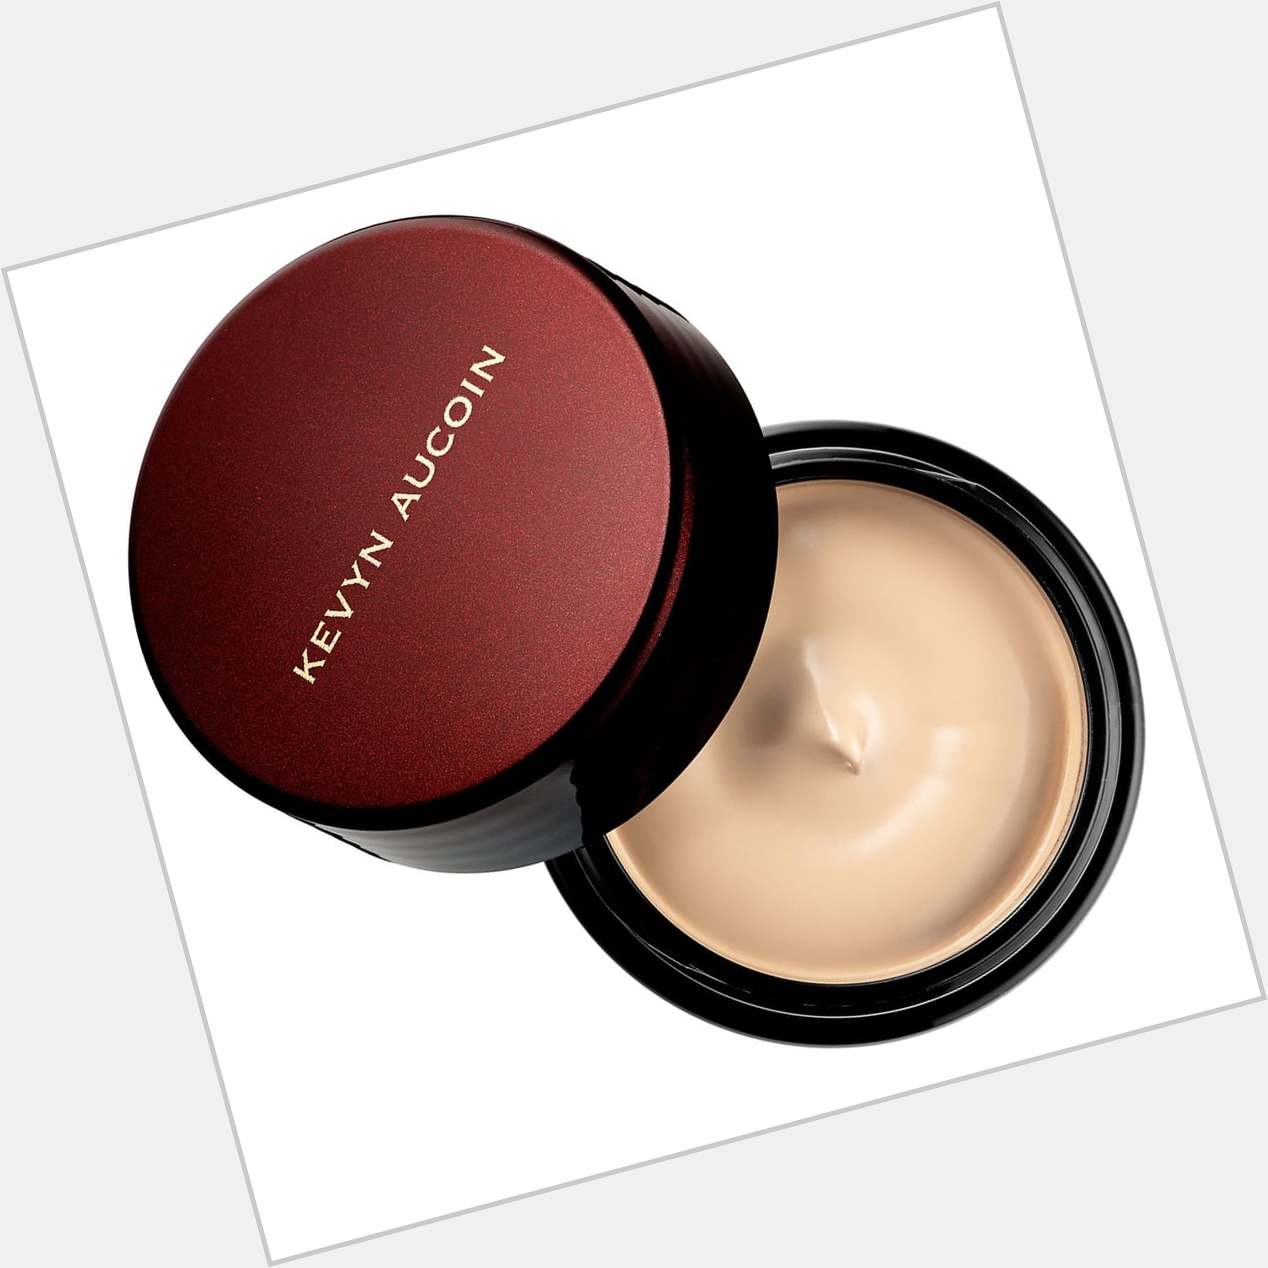 <a href="/hot-men/kevyn-aucoin/is-he-cruelty-free-where-sold-buried">Kevyn Aucoin</a>  